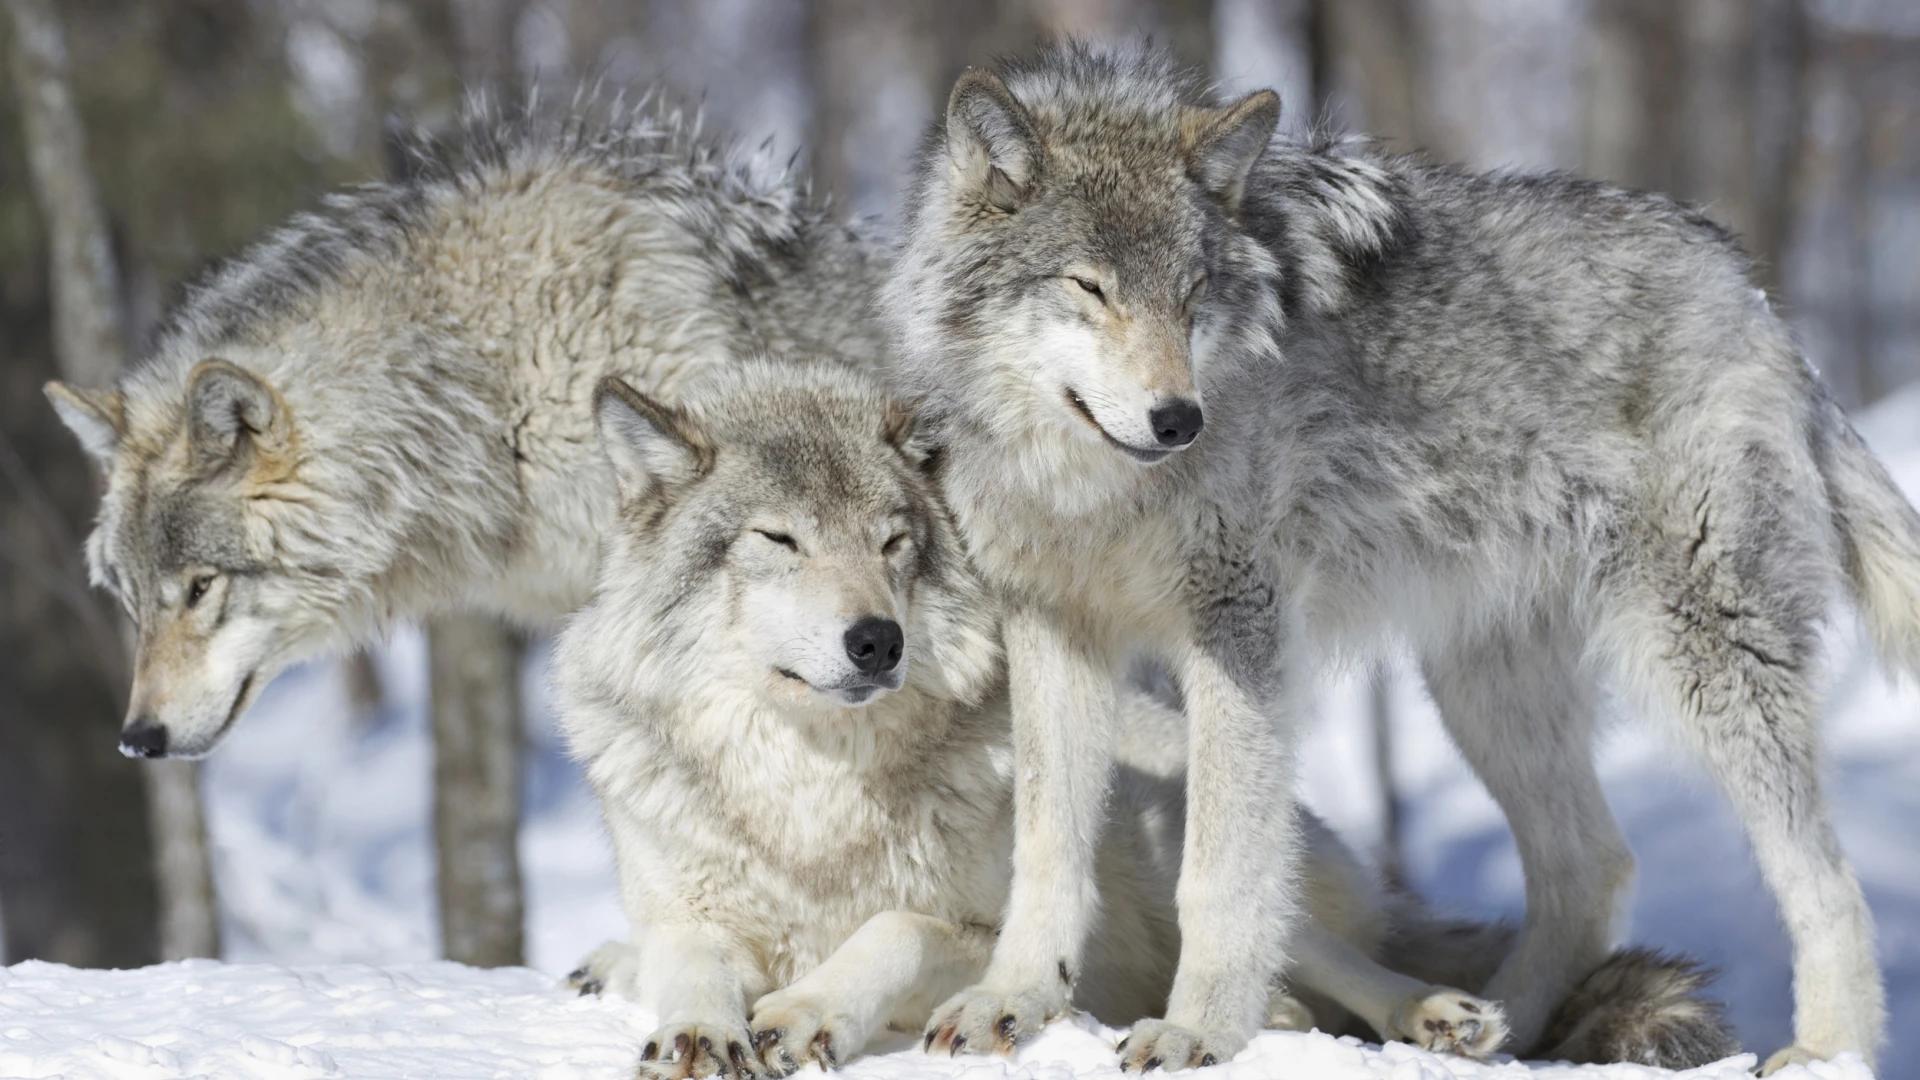 Minnesota residents call for wolves to be delisted